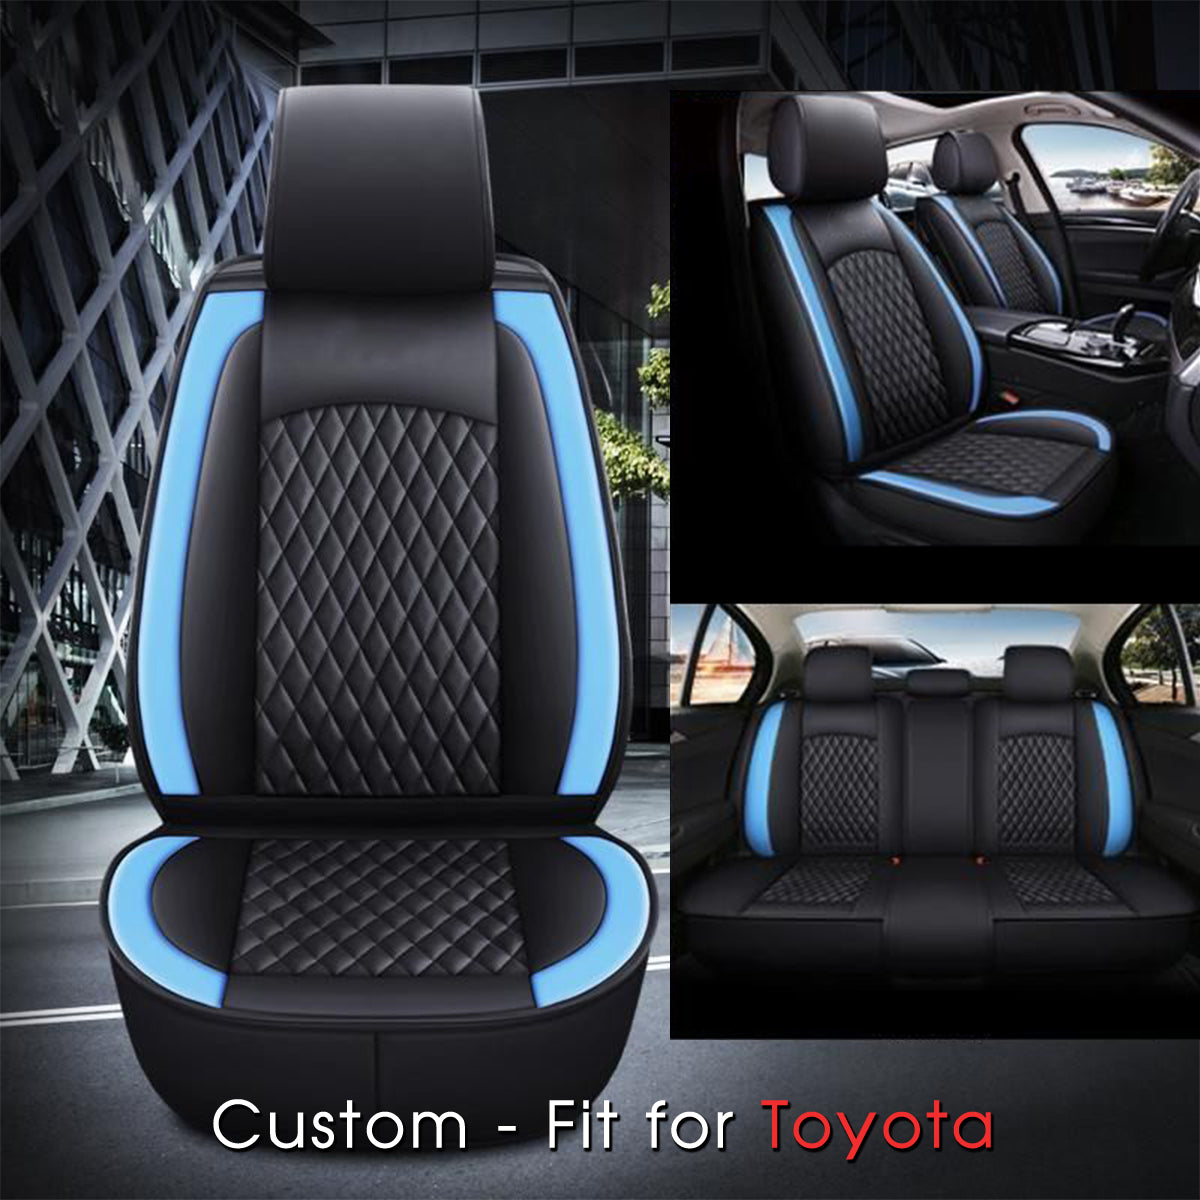 2 Car Seat Covers Full Set, Custom-Fit For Car, Waterproof Leather Front Rear Seat Automotive Protection Cushions, Car Accessories WAPF211